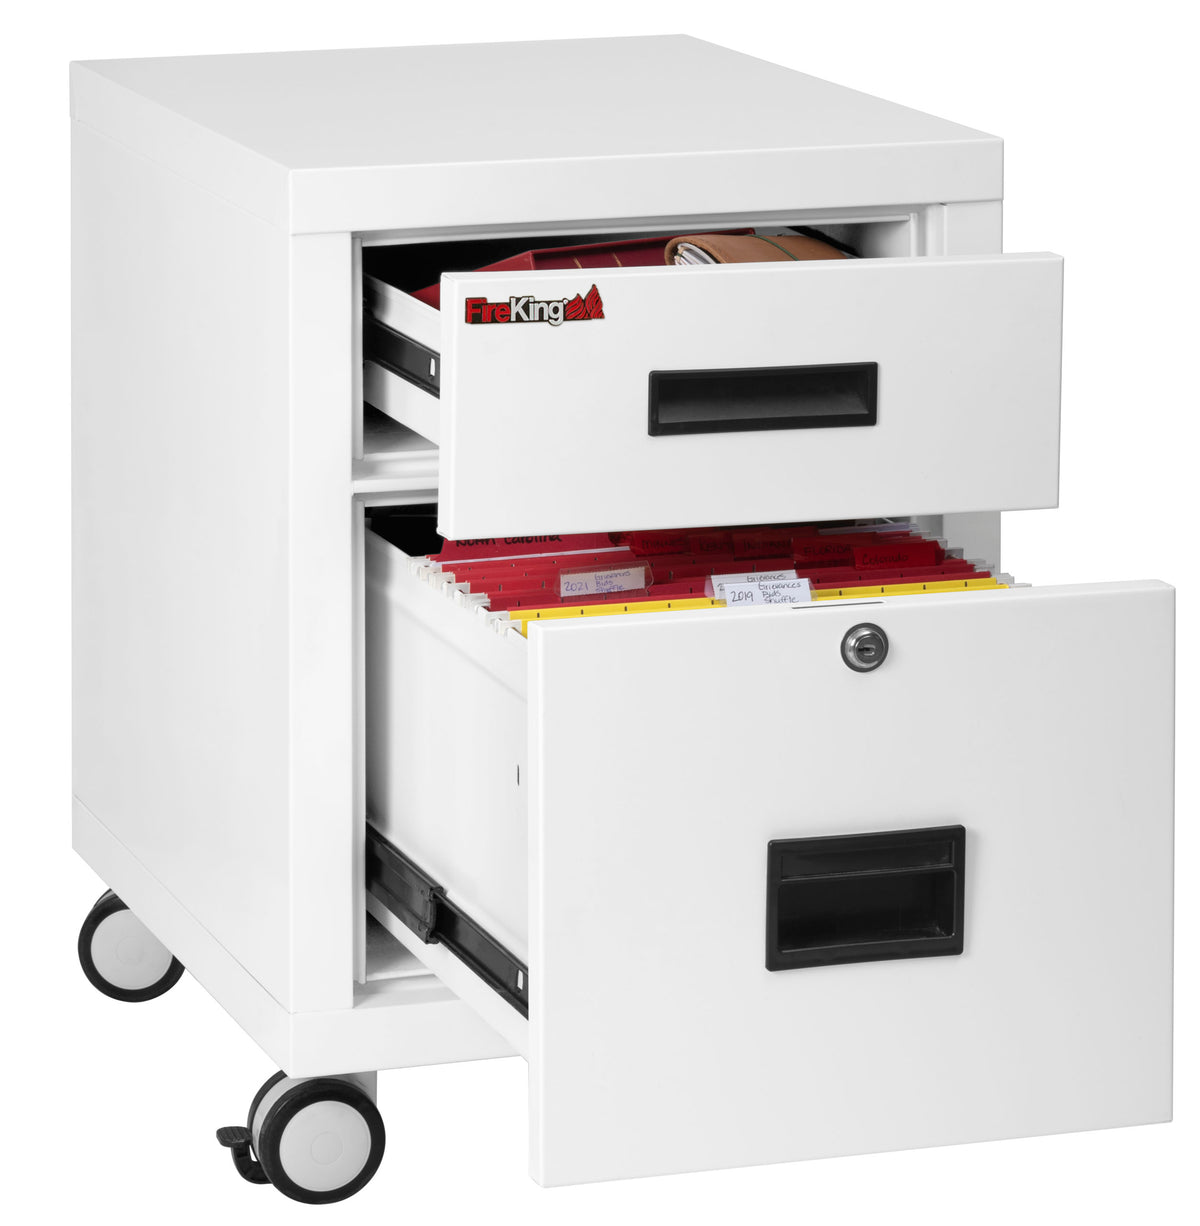 FireKing Mobile Pedestal Fire Rated File Cabinet Arctic White Drawers Open